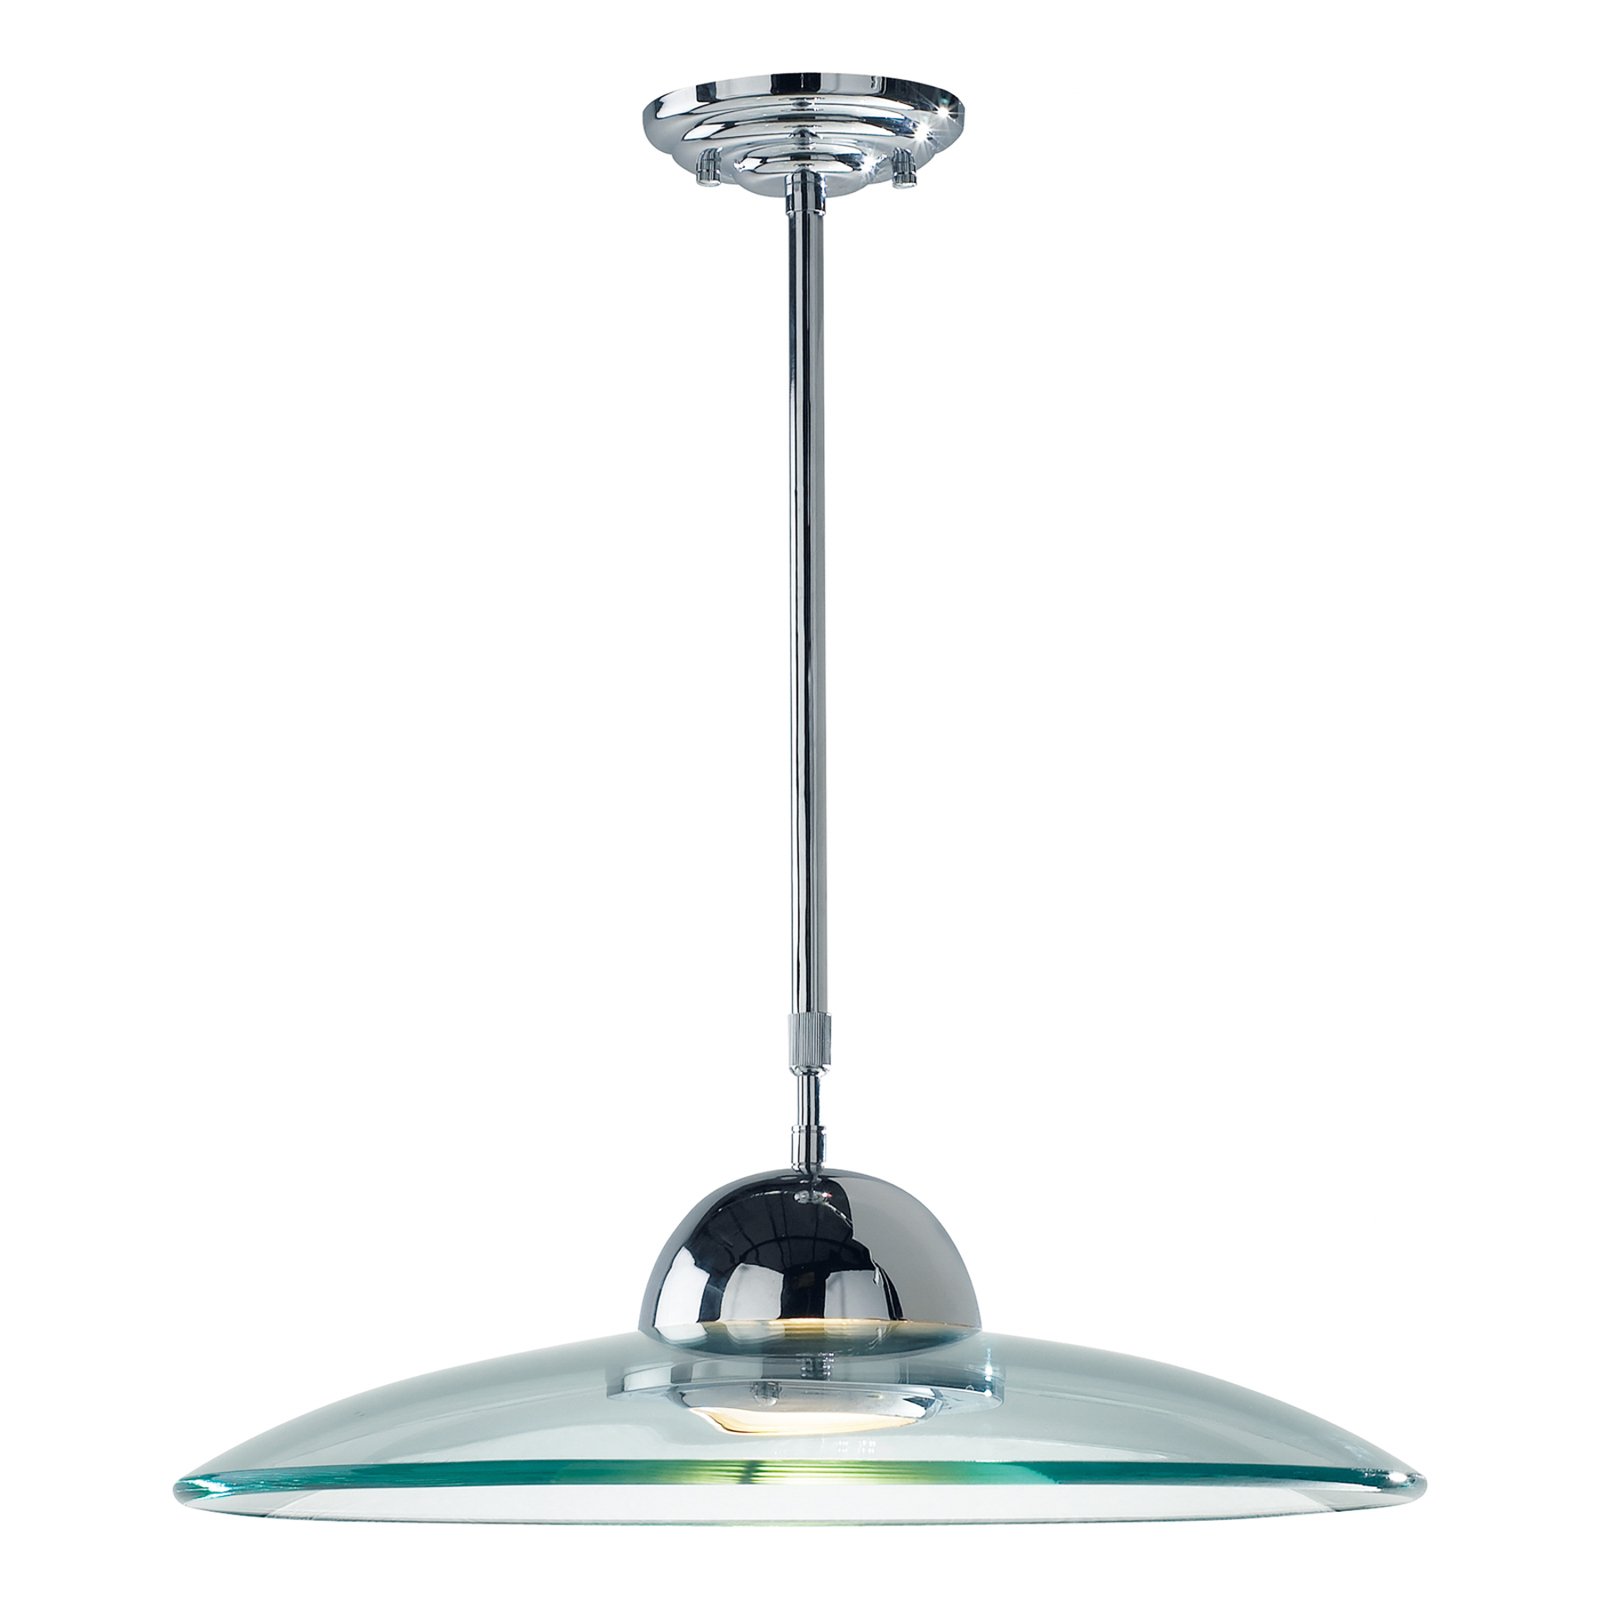 Hemisphere pendant light with clear glass shade